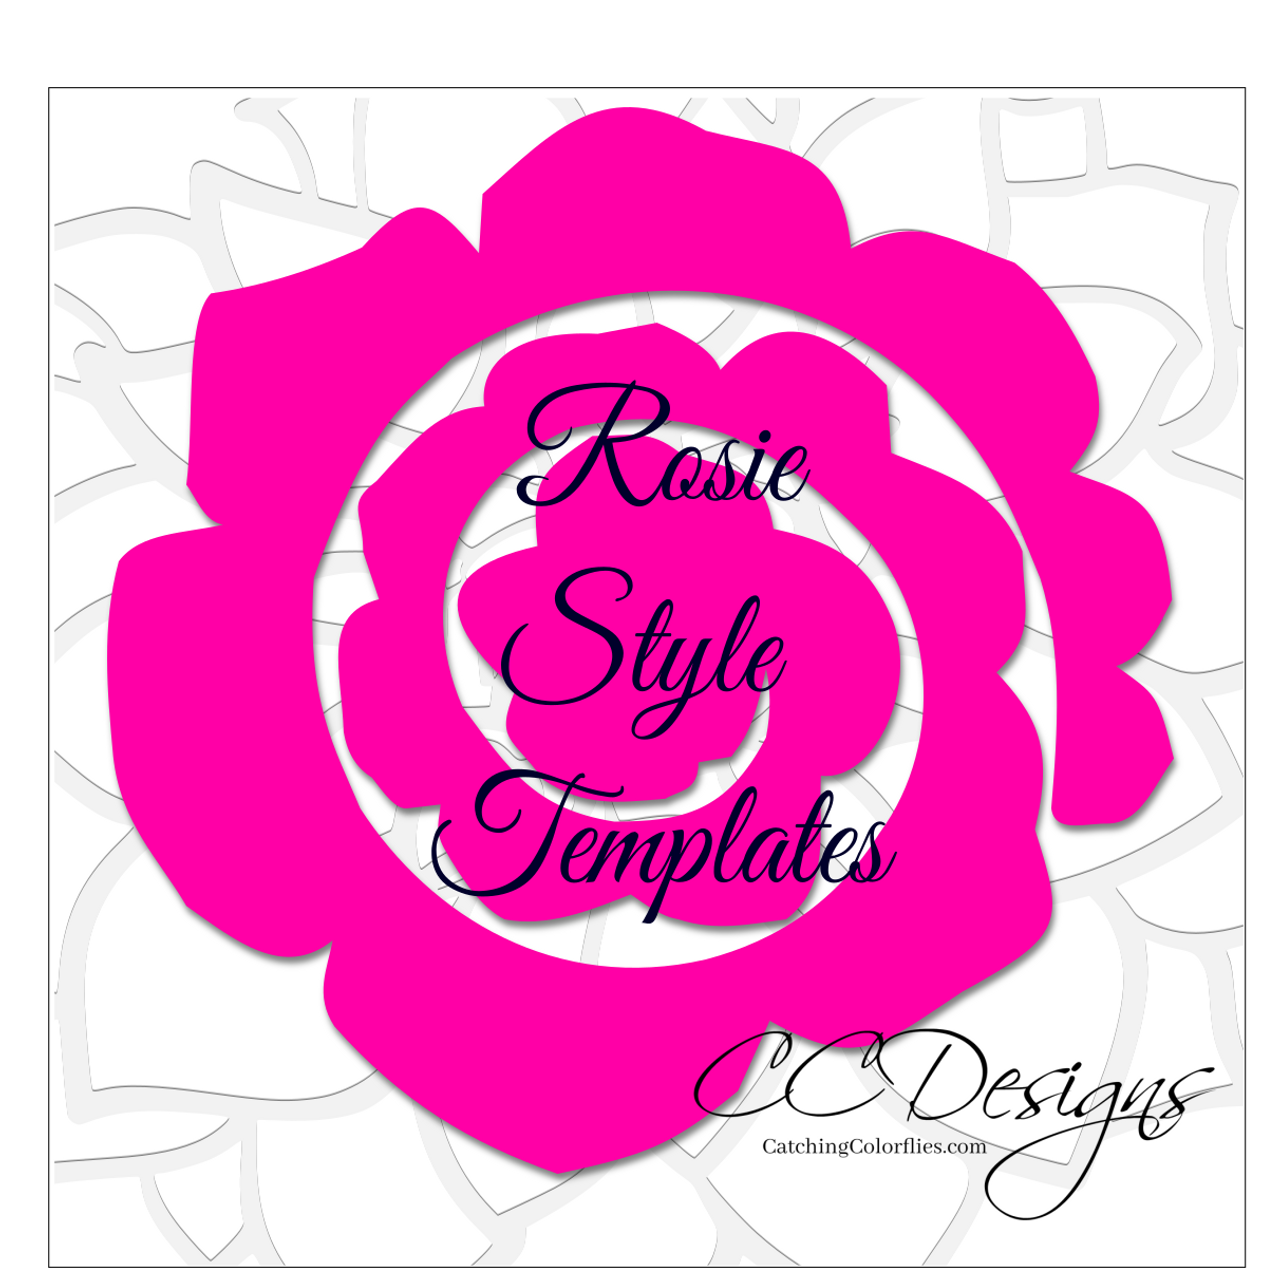 Download Rosie Style Templates - Catching Colorflies